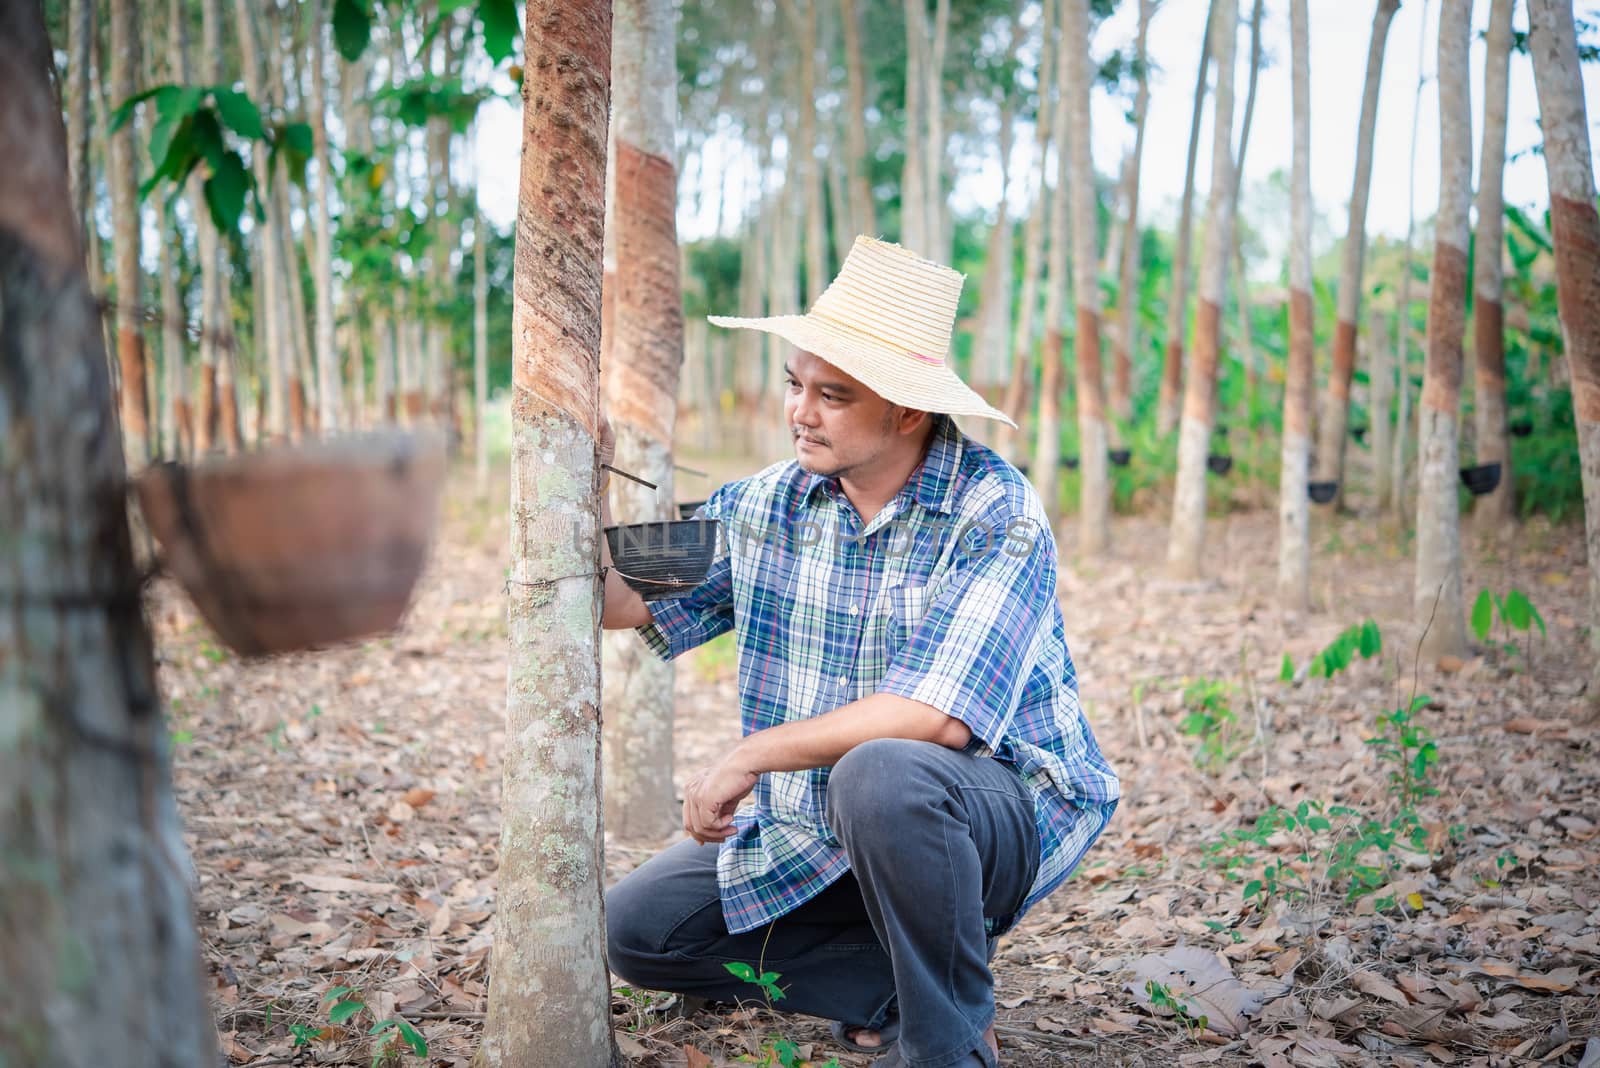 Asian man farmer agriculturist happy at a rubber tree plantation with Rubber tree in row natural latex is a agriculture harvesting natural rubber in white milk color for industry in Thailand